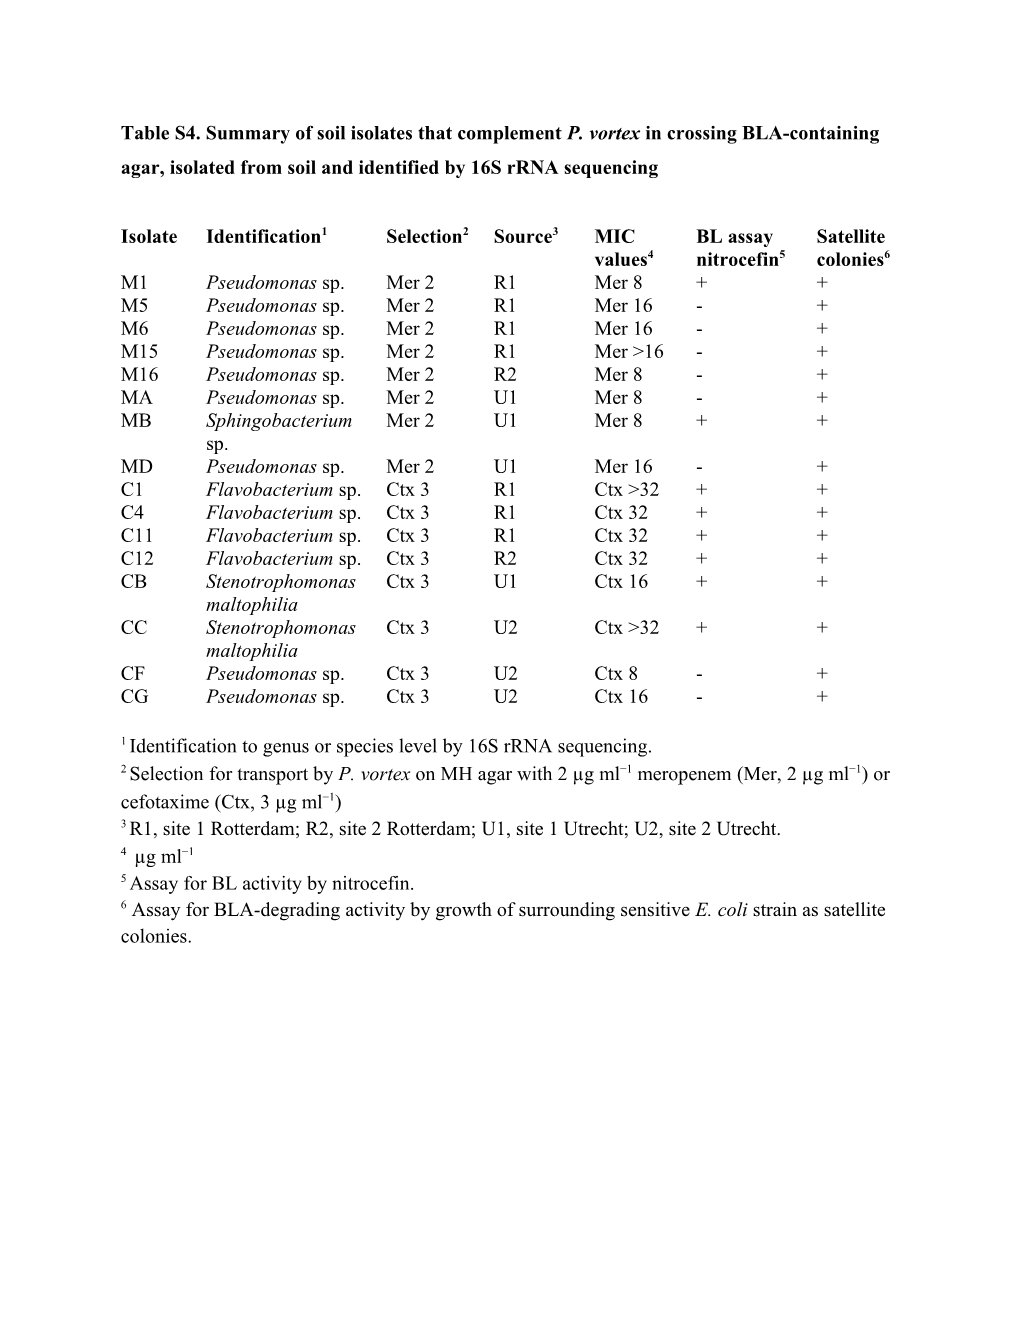 Table S4. Summary of Soil Isolates That Complement P. Vortex in Crossing BLA-Containing